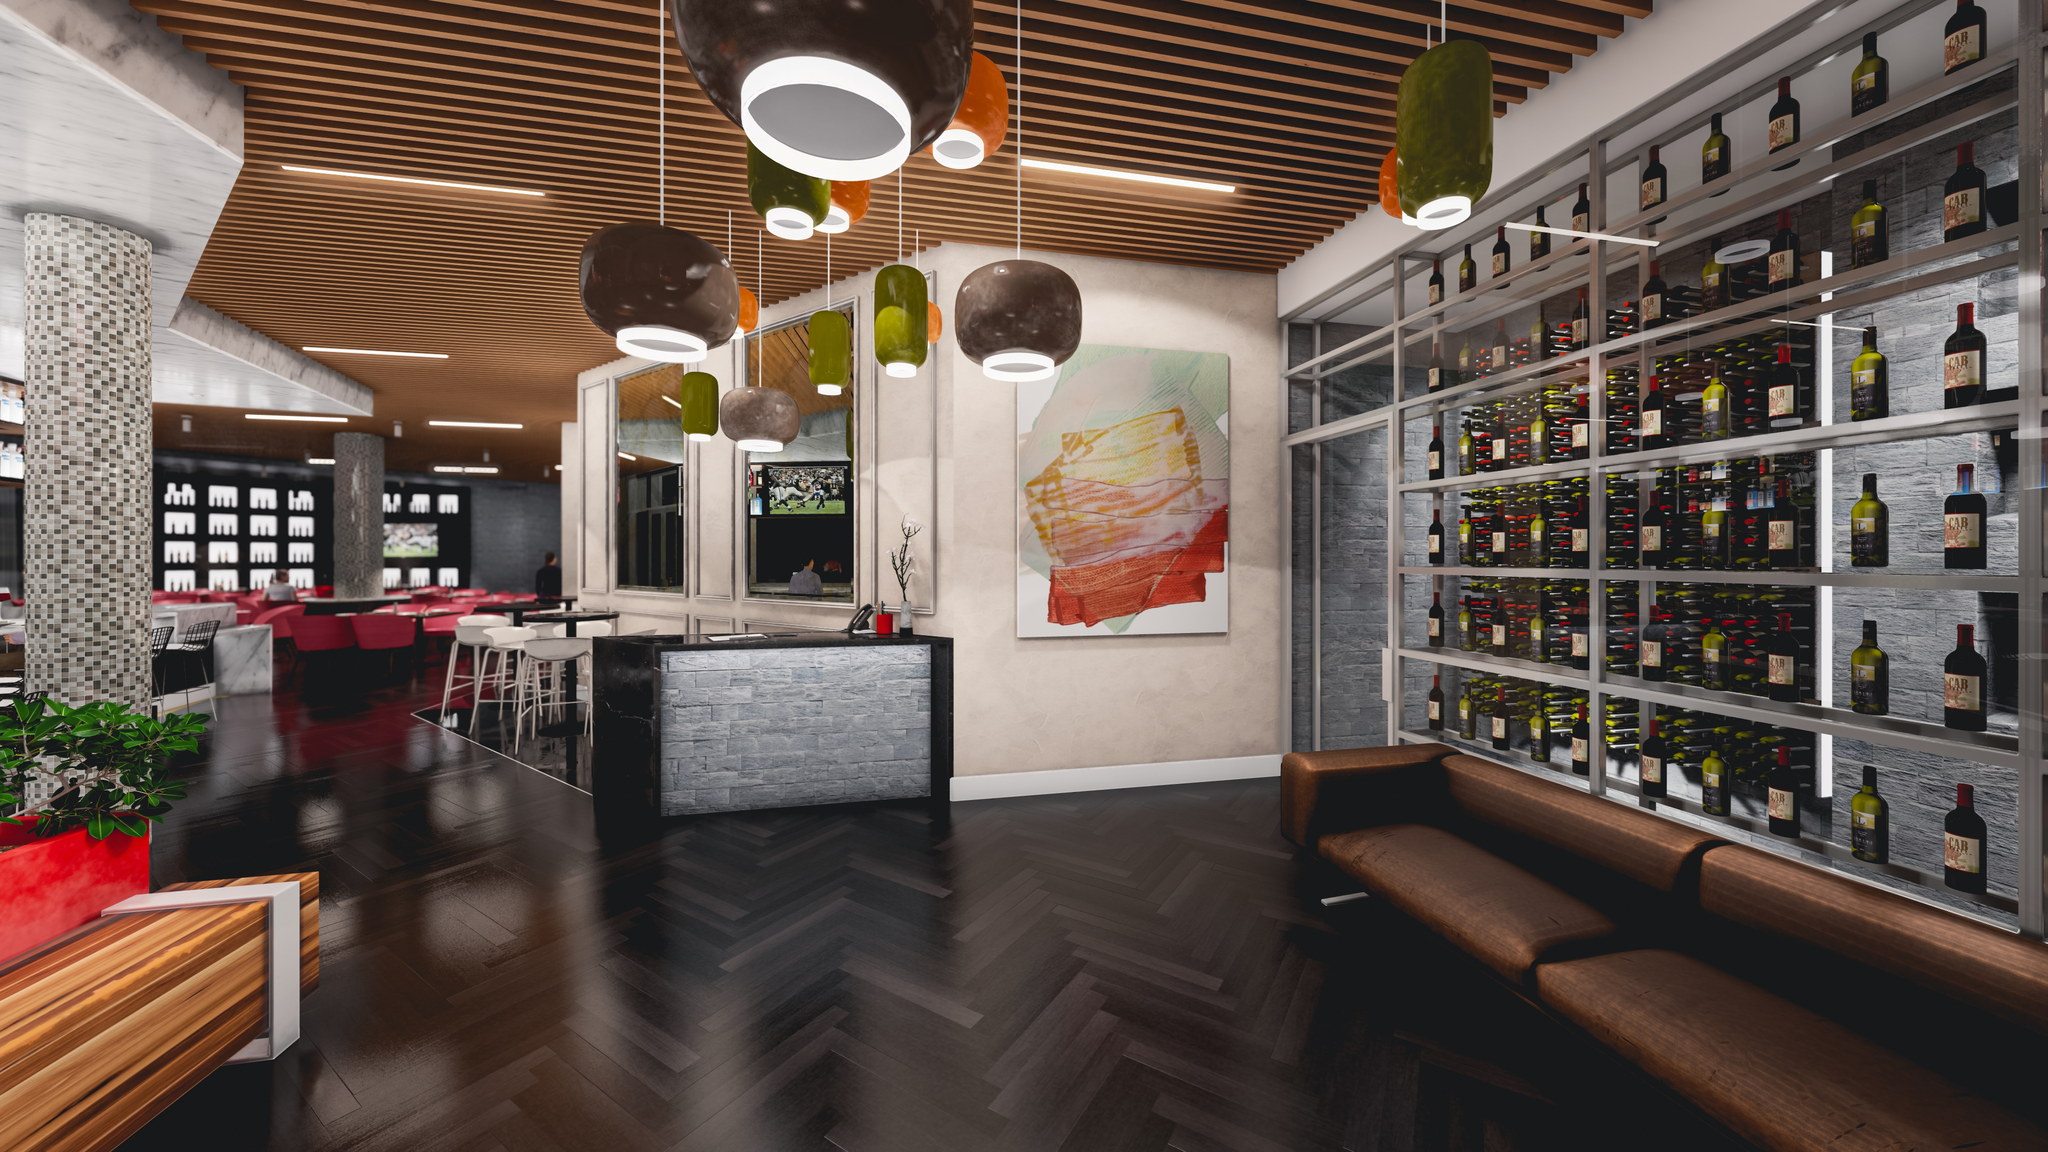 Basilico at Evora, a Masterfully Planned Community, Announces Executive Chef Francesco Di Caudo, Opening Early 2023